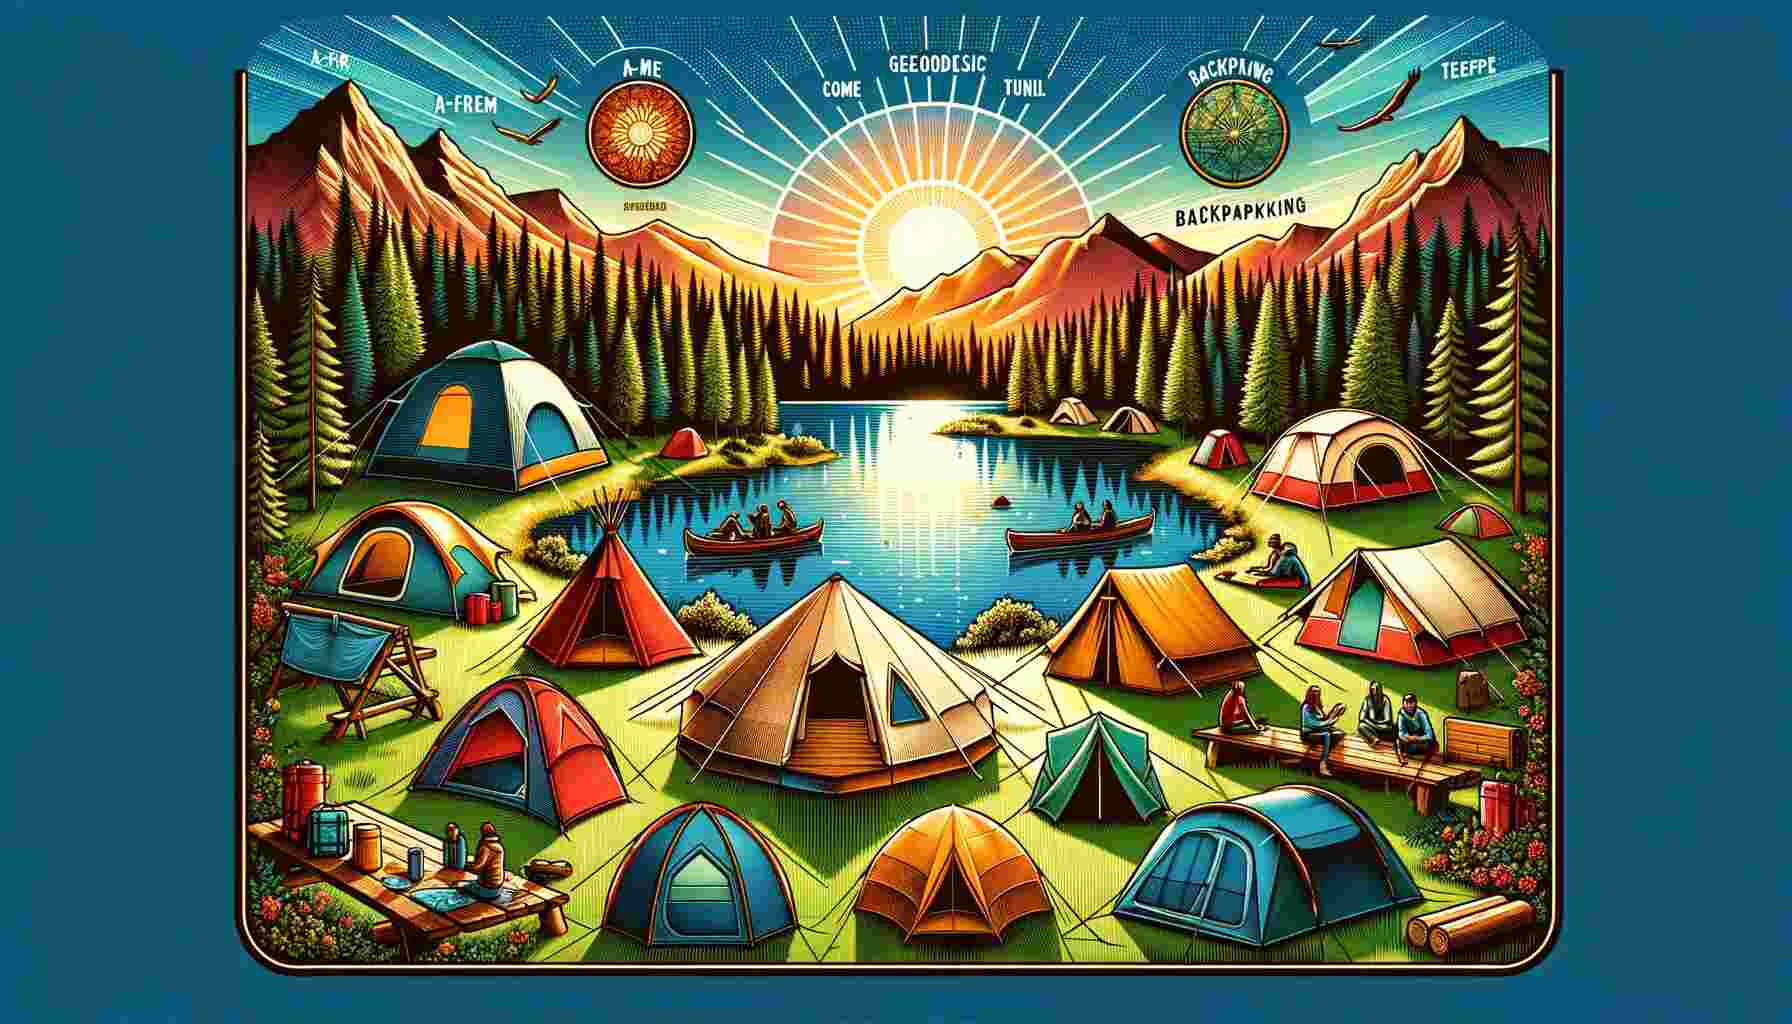 Various tent types including A-frame, dome, geodesic, tunnel, pop-up, cabin, backpacking, and teepee tents in a vibrant outdoor setting with a forest, lake, and mountains.